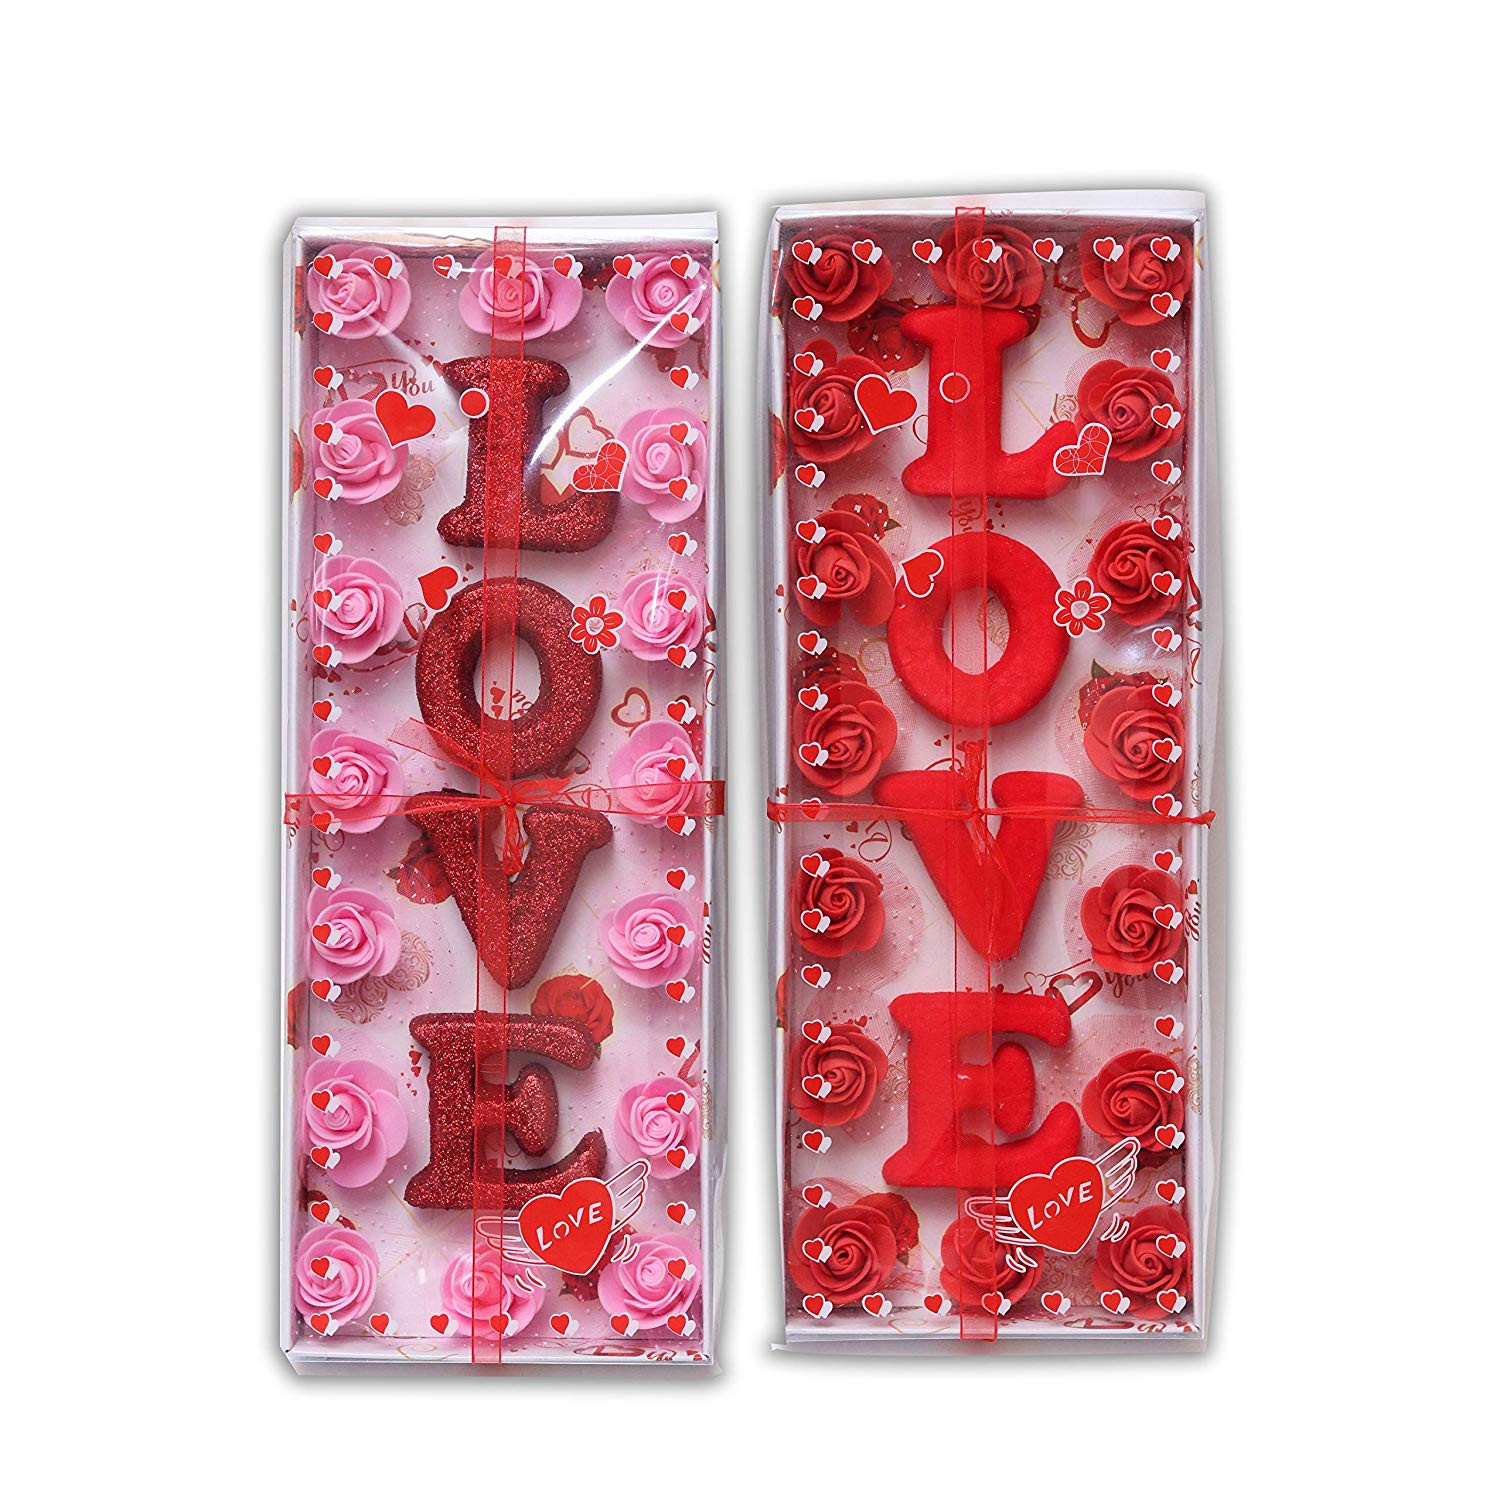 Cheap Valentines Day Gifts For Her
 Romantic Valentines Day Gift Ideas For Girlfriend Diy Good